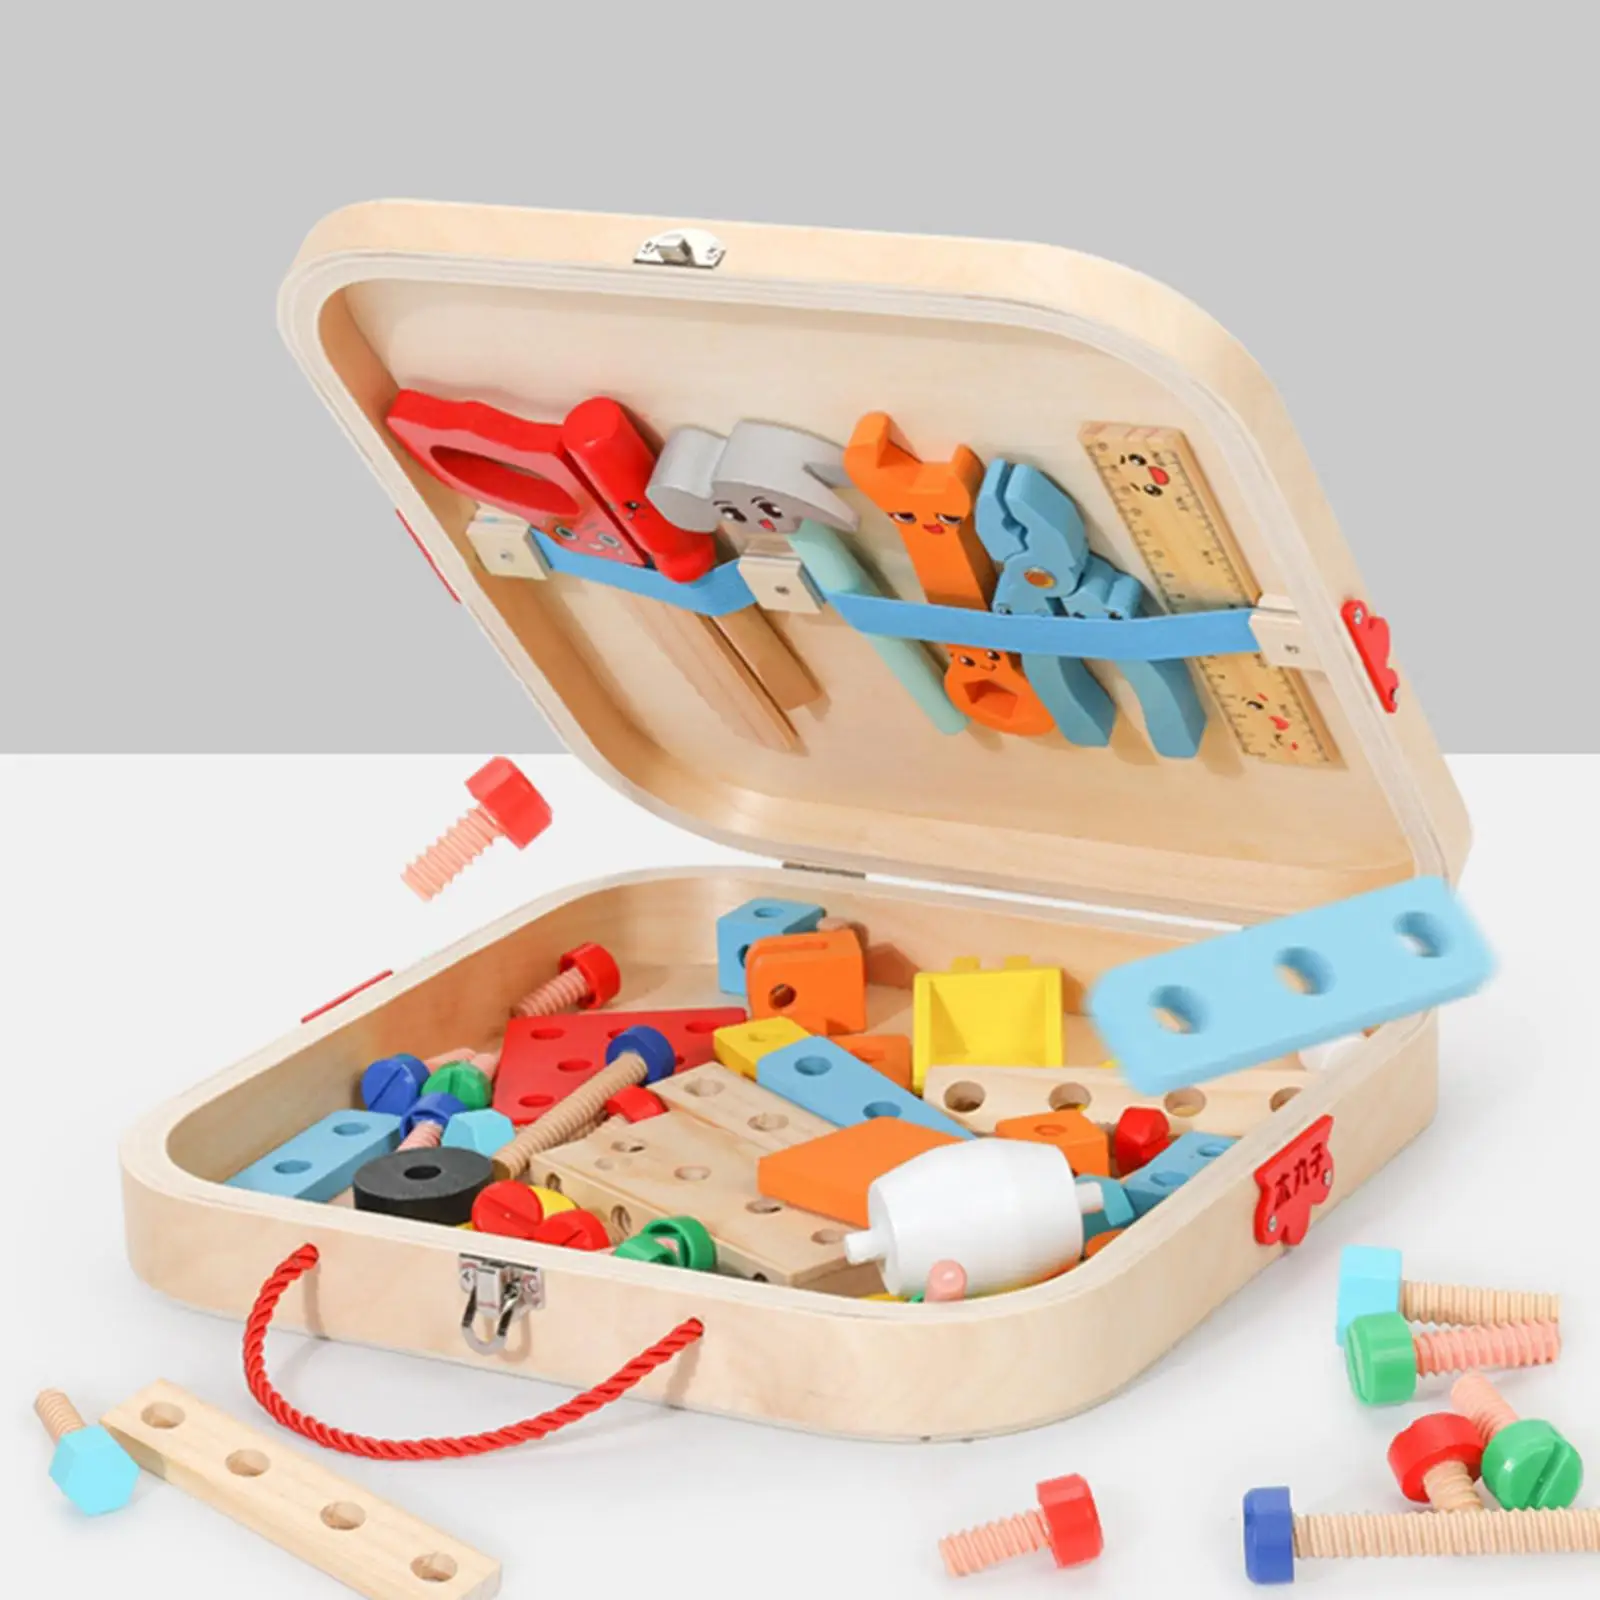 Kids Tool Set Wooden Tools Box Pretend Toy Toddlers Wooden Tool Toy with Tools Box for Birthday Gift DIY Living Room